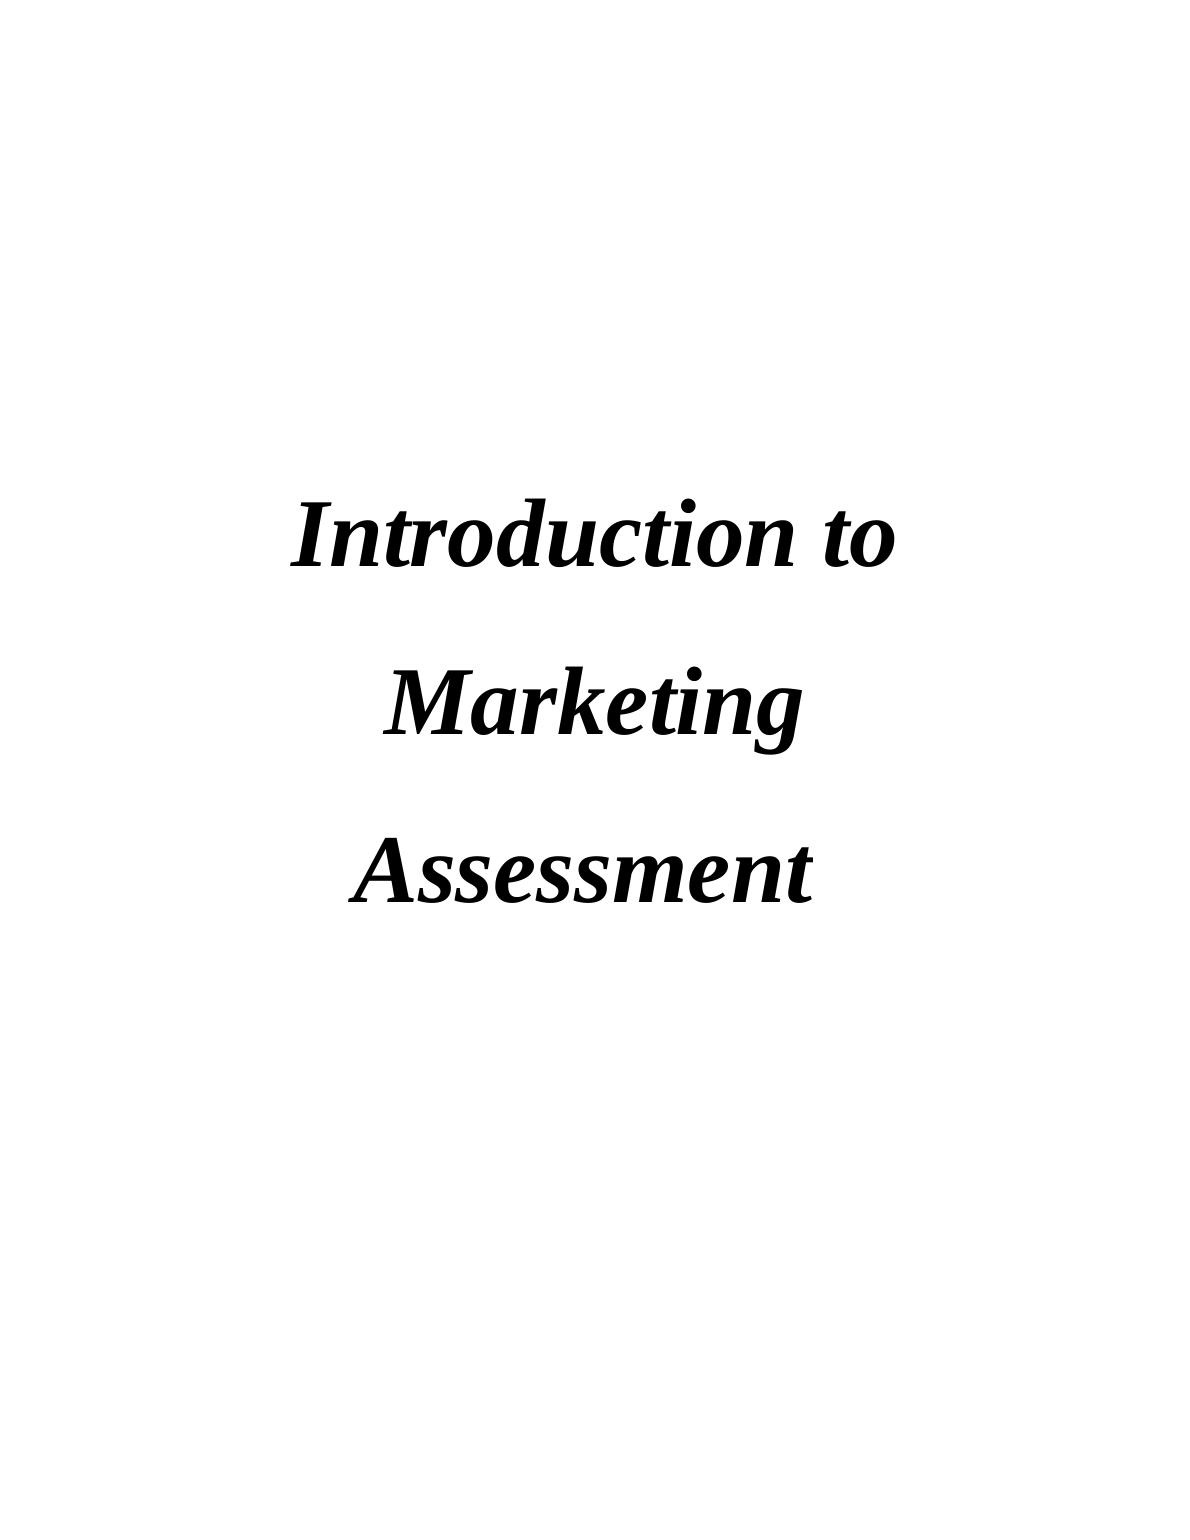 (Solution) Introduction to Marketing Assessment_1